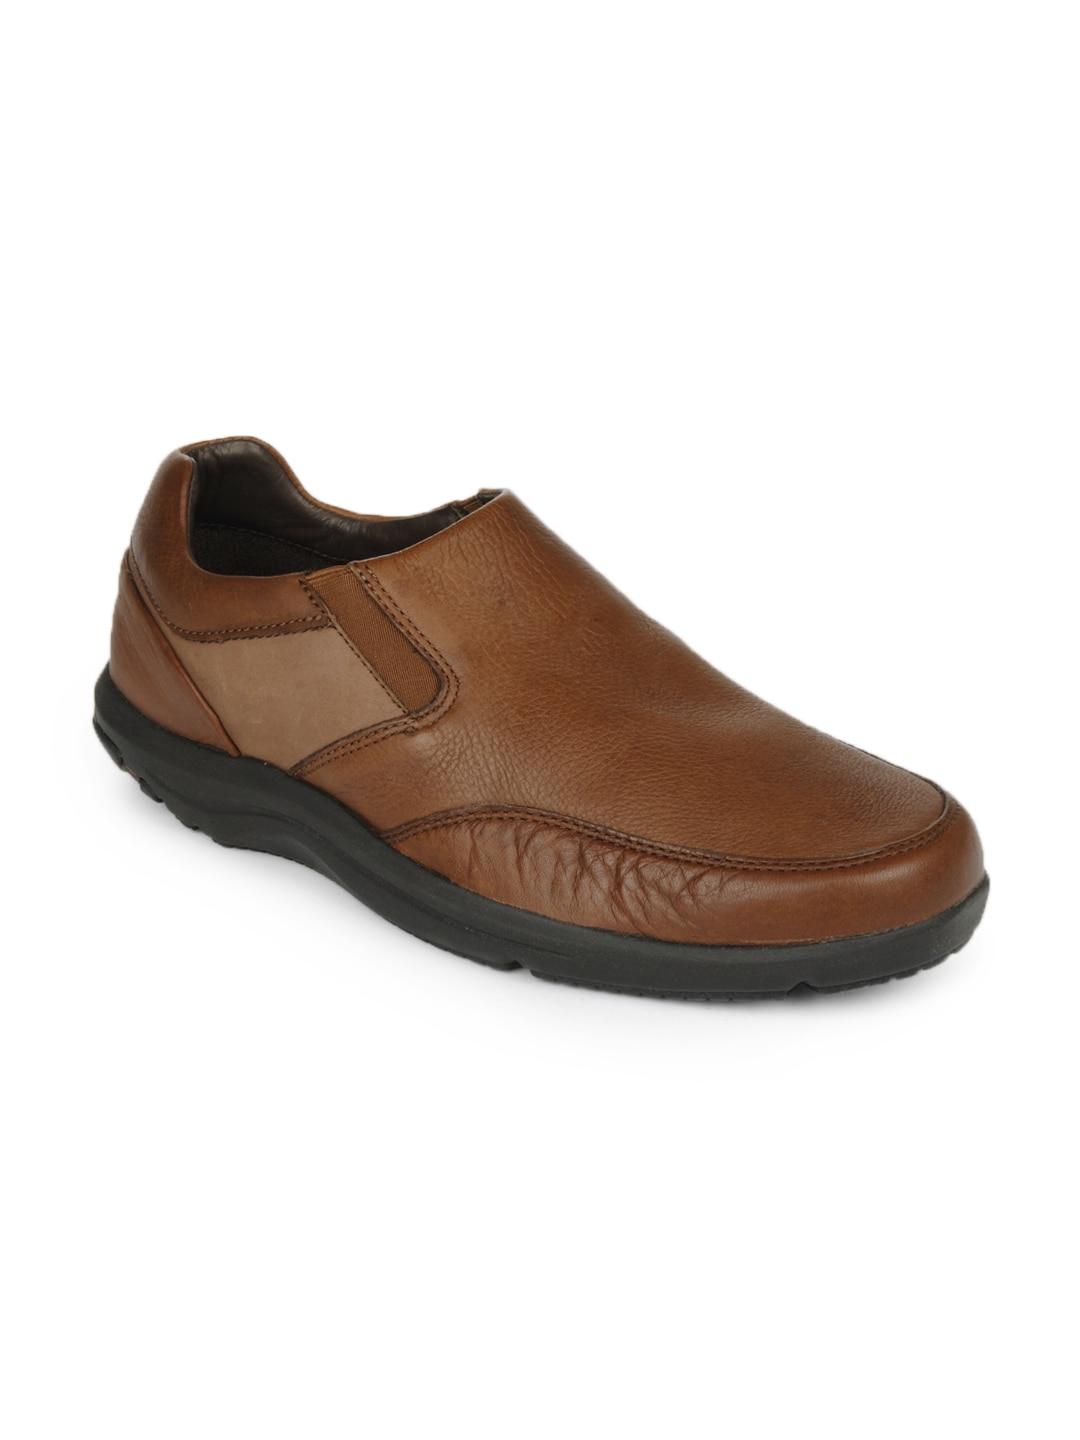 Rockport Men Brown Leather Casual Shoes